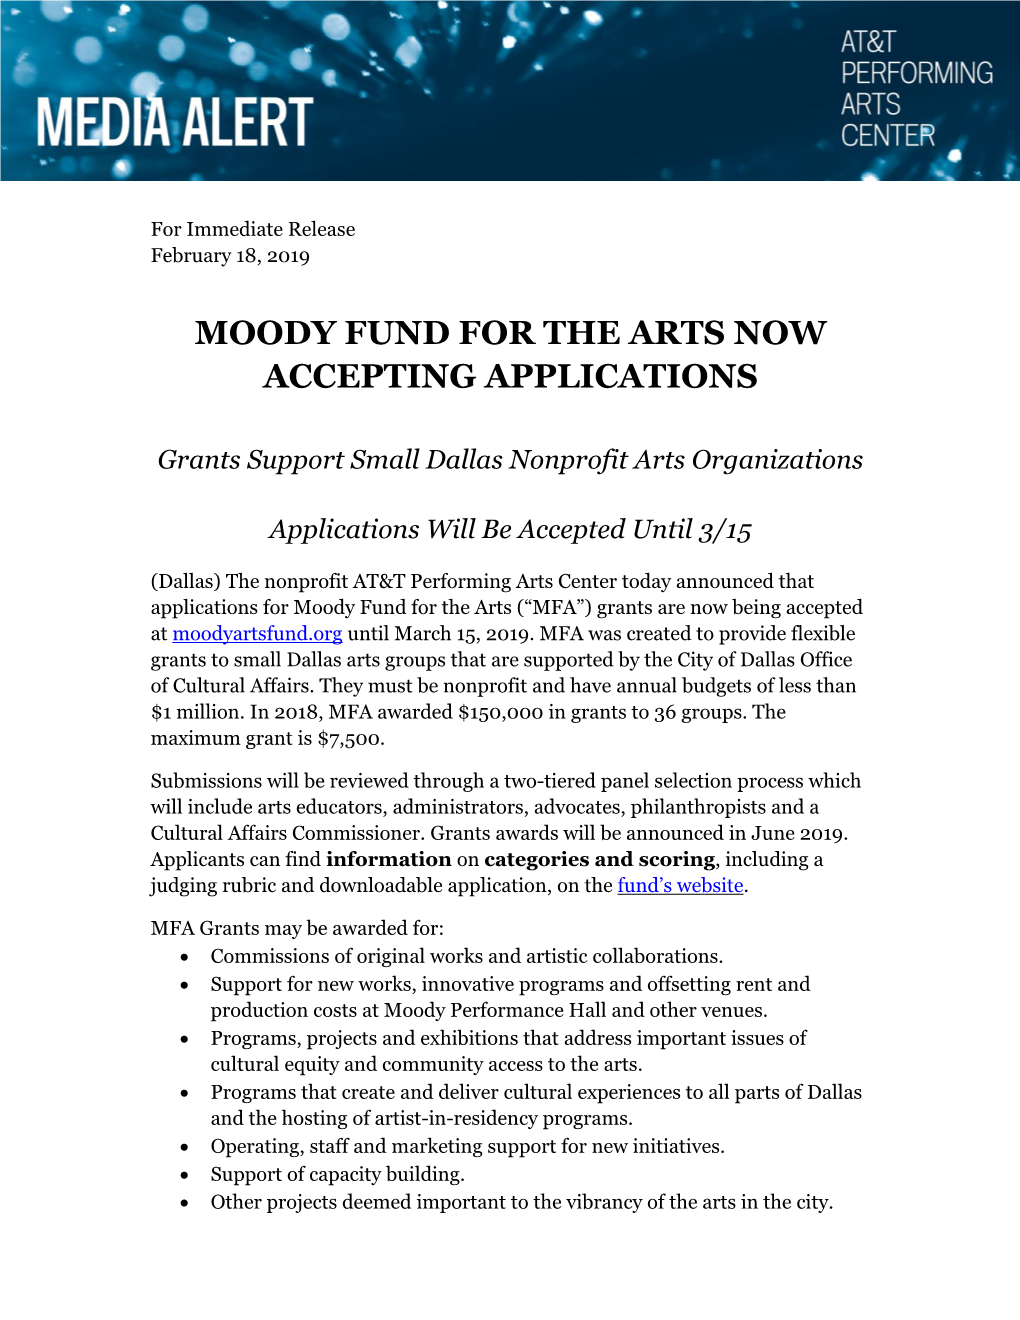 Moody Fund for the Arts Now Accepting Applications